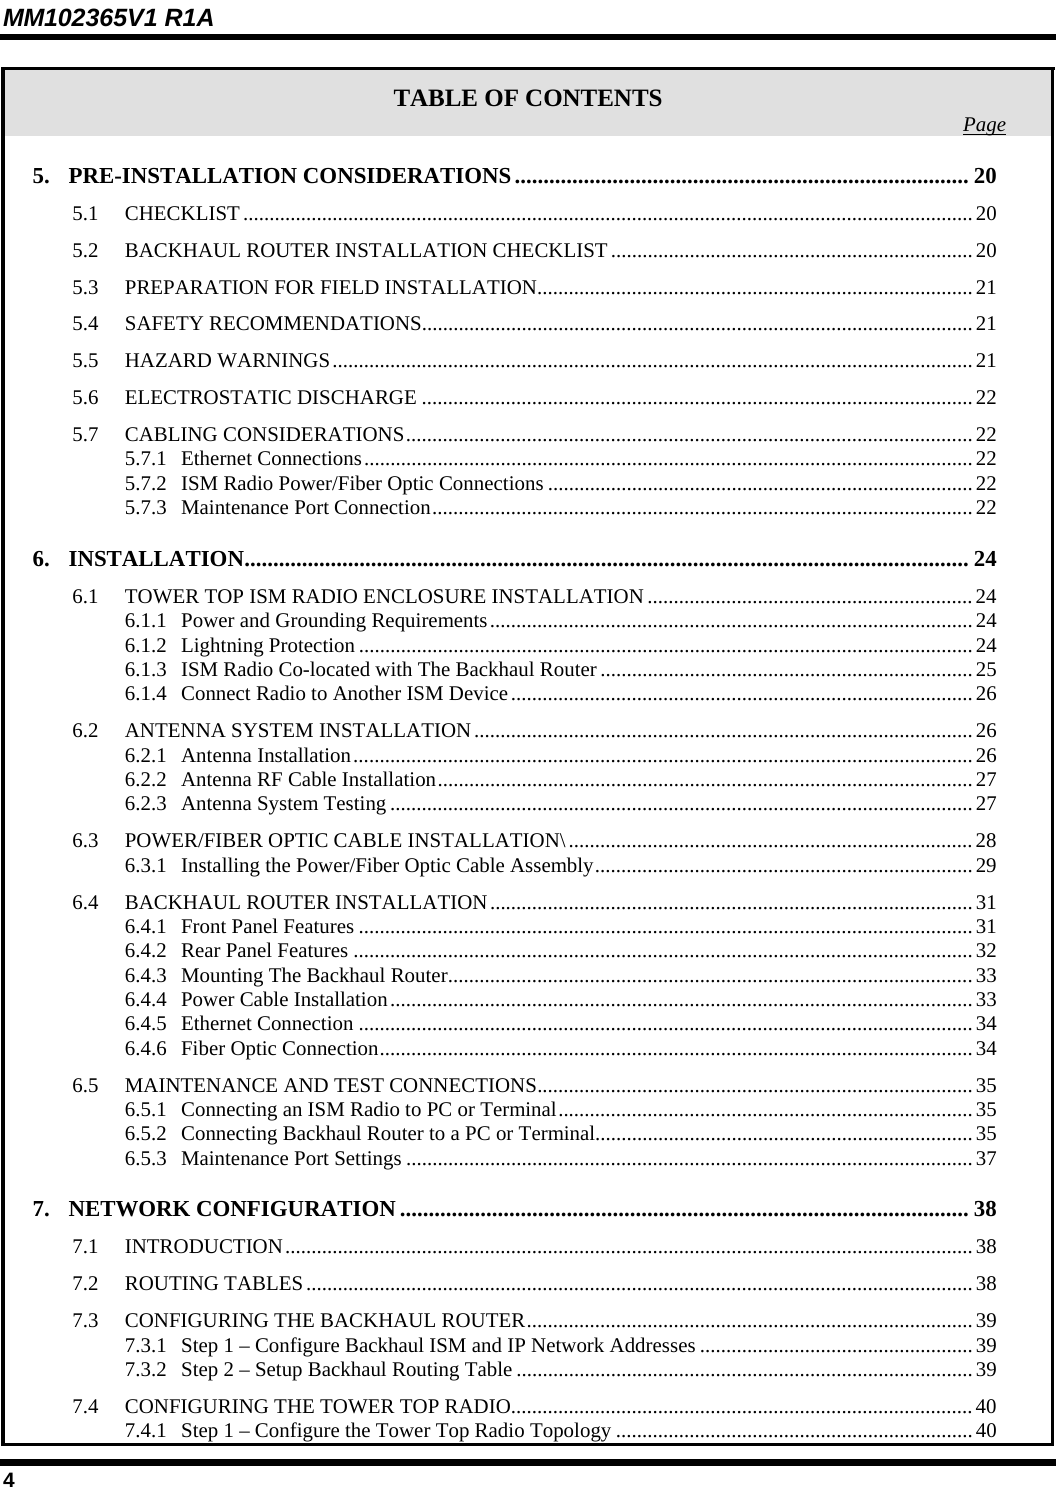 MM102365V1 R1A TABLE OF CONTENTS  Page5. PRE-INSTALLATION CONSIDERATIONS............................................................................... 20 5.1 CHECKLIST...........................................................................................................................................20 5.2 BACKHAUL ROUTER INSTALLATION CHECKLIST.....................................................................20 5.3 PREPARATION FOR FIELD INSTALLATION...................................................................................21 5.4 SAFETY RECOMMENDATIONS.........................................................................................................21 5.5 HAZARD WARNINGS..........................................................................................................................21 5.6 ELECTROSTATIC DISCHARGE .........................................................................................................22 5.7 CABLING CONSIDERATIONS............................................................................................................22 5.7.1 Ethernet Connections....................................................................................................................22 5.7.2 ISM Radio Power/Fiber Optic Connections .................................................................................22 5.7.3 Maintenance Port Connection.......................................................................................................22 6. INSTALLATION.............................................................................................................................. 24 6.1 TOWER TOP ISM RADIO ENCLOSURE INSTALLATION .............................................................. 24 6.1.1 Power and Grounding Requirements............................................................................................24 6.1.2 Lightning Protection .....................................................................................................................24 6.1.3 ISM Radio Co-located with The Backhaul Router .......................................................................25 6.1.4 Connect Radio to Another ISM Device........................................................................................26 6.2 ANTENNA SYSTEM INSTALLATION............................................................................................... 26 6.2.1 Antenna Installation......................................................................................................................26 6.2.2 Antenna RF Cable Installation......................................................................................................27 6.2.3 Antenna System Testing ...............................................................................................................27 6.3 POWER/FIBER OPTIC CABLE INSTALLATION\.............................................................................28 6.3.1 Installing the Power/Fiber Optic Cable Assembly........................................................................29 6.4 BACKHAUL ROUTER INSTALLATION............................................................................................31 6.4.1 Front Panel Features .....................................................................................................................31 6.4.2 Rear Panel Features ......................................................................................................................32 6.4.3 Mounting The Backhaul Router....................................................................................................33 6.4.4 Power Cable Installation...............................................................................................................33 6.4.5 Ethernet Connection .....................................................................................................................34 6.4.6 Fiber Optic Connection.................................................................................................................34 6.5 MAINTENANCE AND TEST CONNECTIONS................................................................................... 35 6.5.1 Connecting an ISM Radio to PC or Terminal............................................................................... 35 6.5.2 Connecting Backhaul Router to a PC or Terminal........................................................................35 6.5.3 Maintenance Port Settings ............................................................................................................37 7. NETWORK CONFIGURATION ................................................................................................... 38 7.1 INTRODUCTION...................................................................................................................................38 7.2 ROUTING TABLES............................................................................................................................... 38 7.3 CONFIGURING THE BACKHAUL ROUTER.....................................................................................39 7.3.1 Step 1 – Configure Backhaul ISM and IP Network Addresses ....................................................39 7.3.2 Step 2 – Setup Backhaul Routing Table .......................................................................................39 7.4 CONFIGURING THE TOWER TOP RADIO........................................................................................40 7.4.1 Step 1 – Configure the Tower Top Radio Topology .................................................................... 40 4 